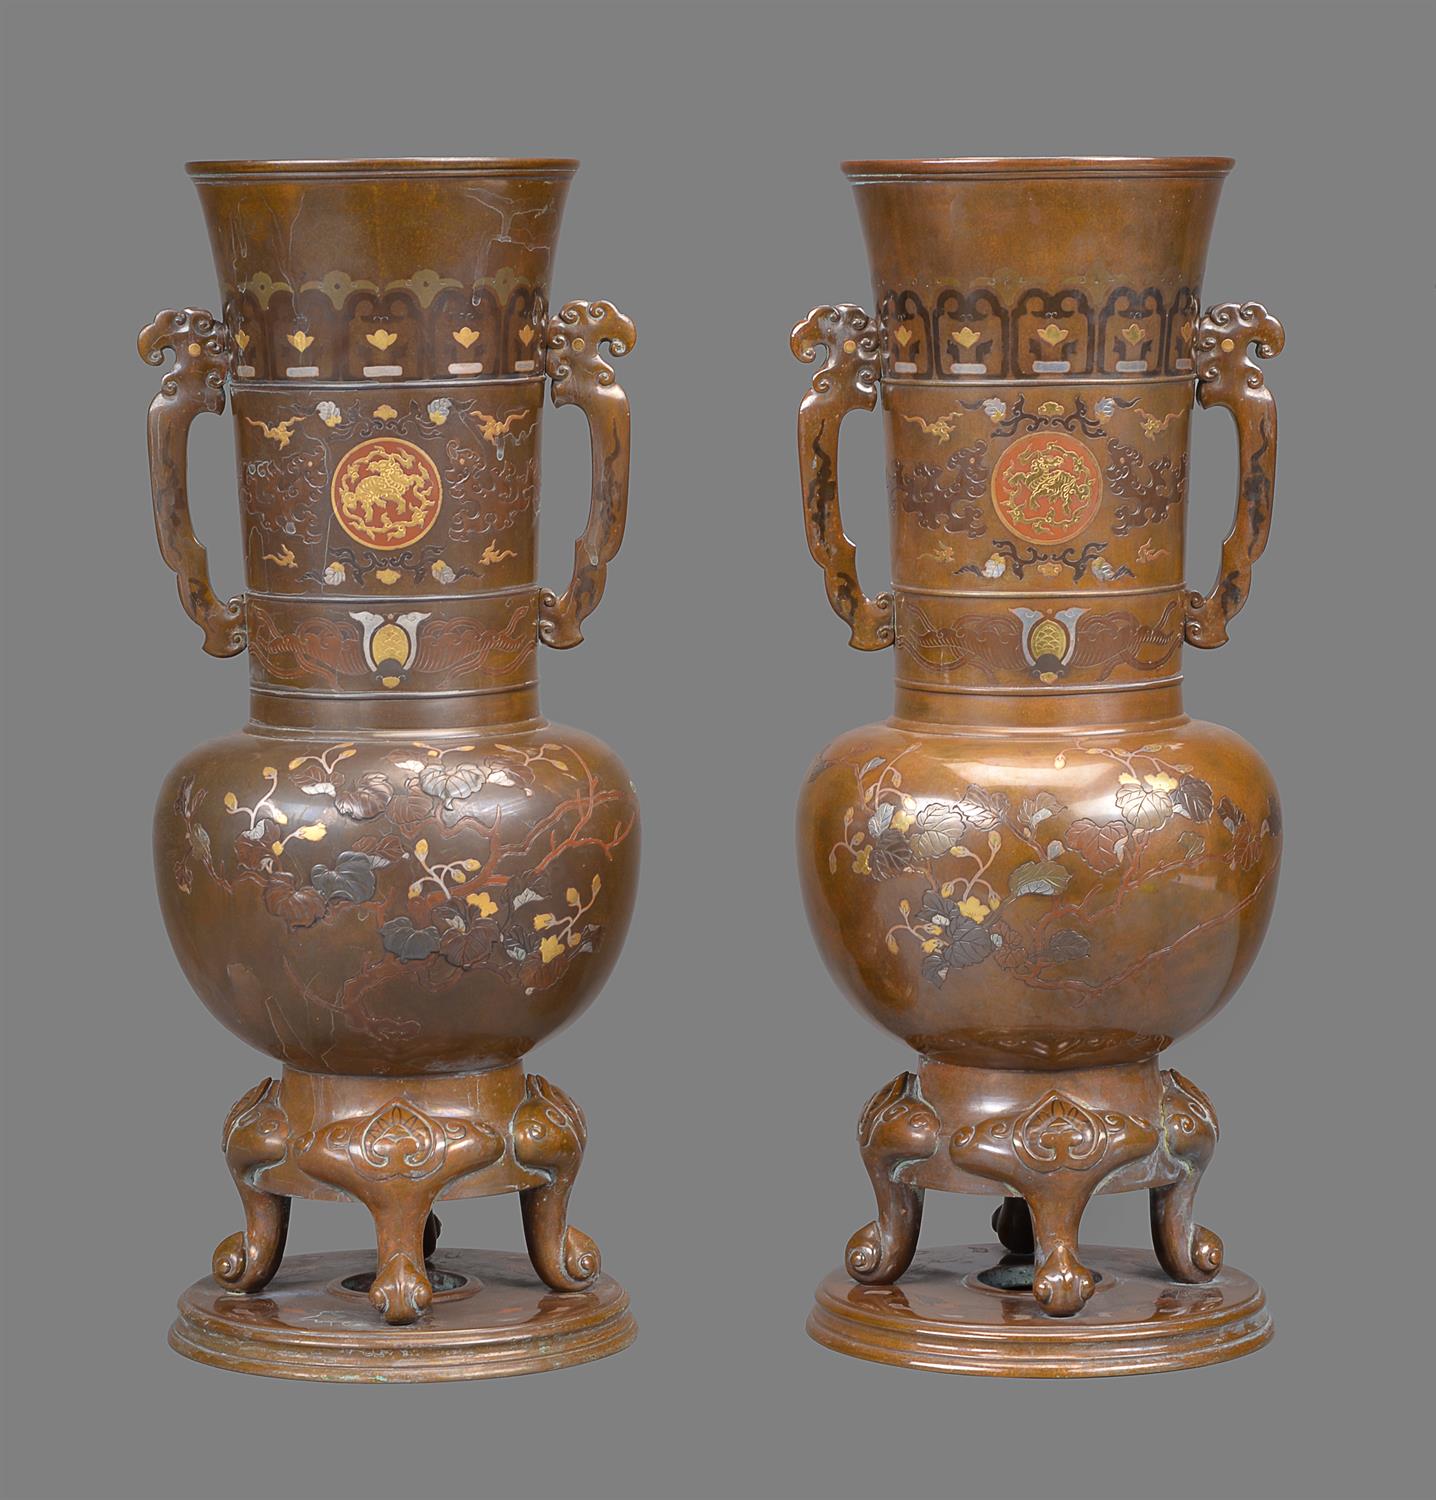 A Pair of Japanese Bronze Vases - Image 2 of 4